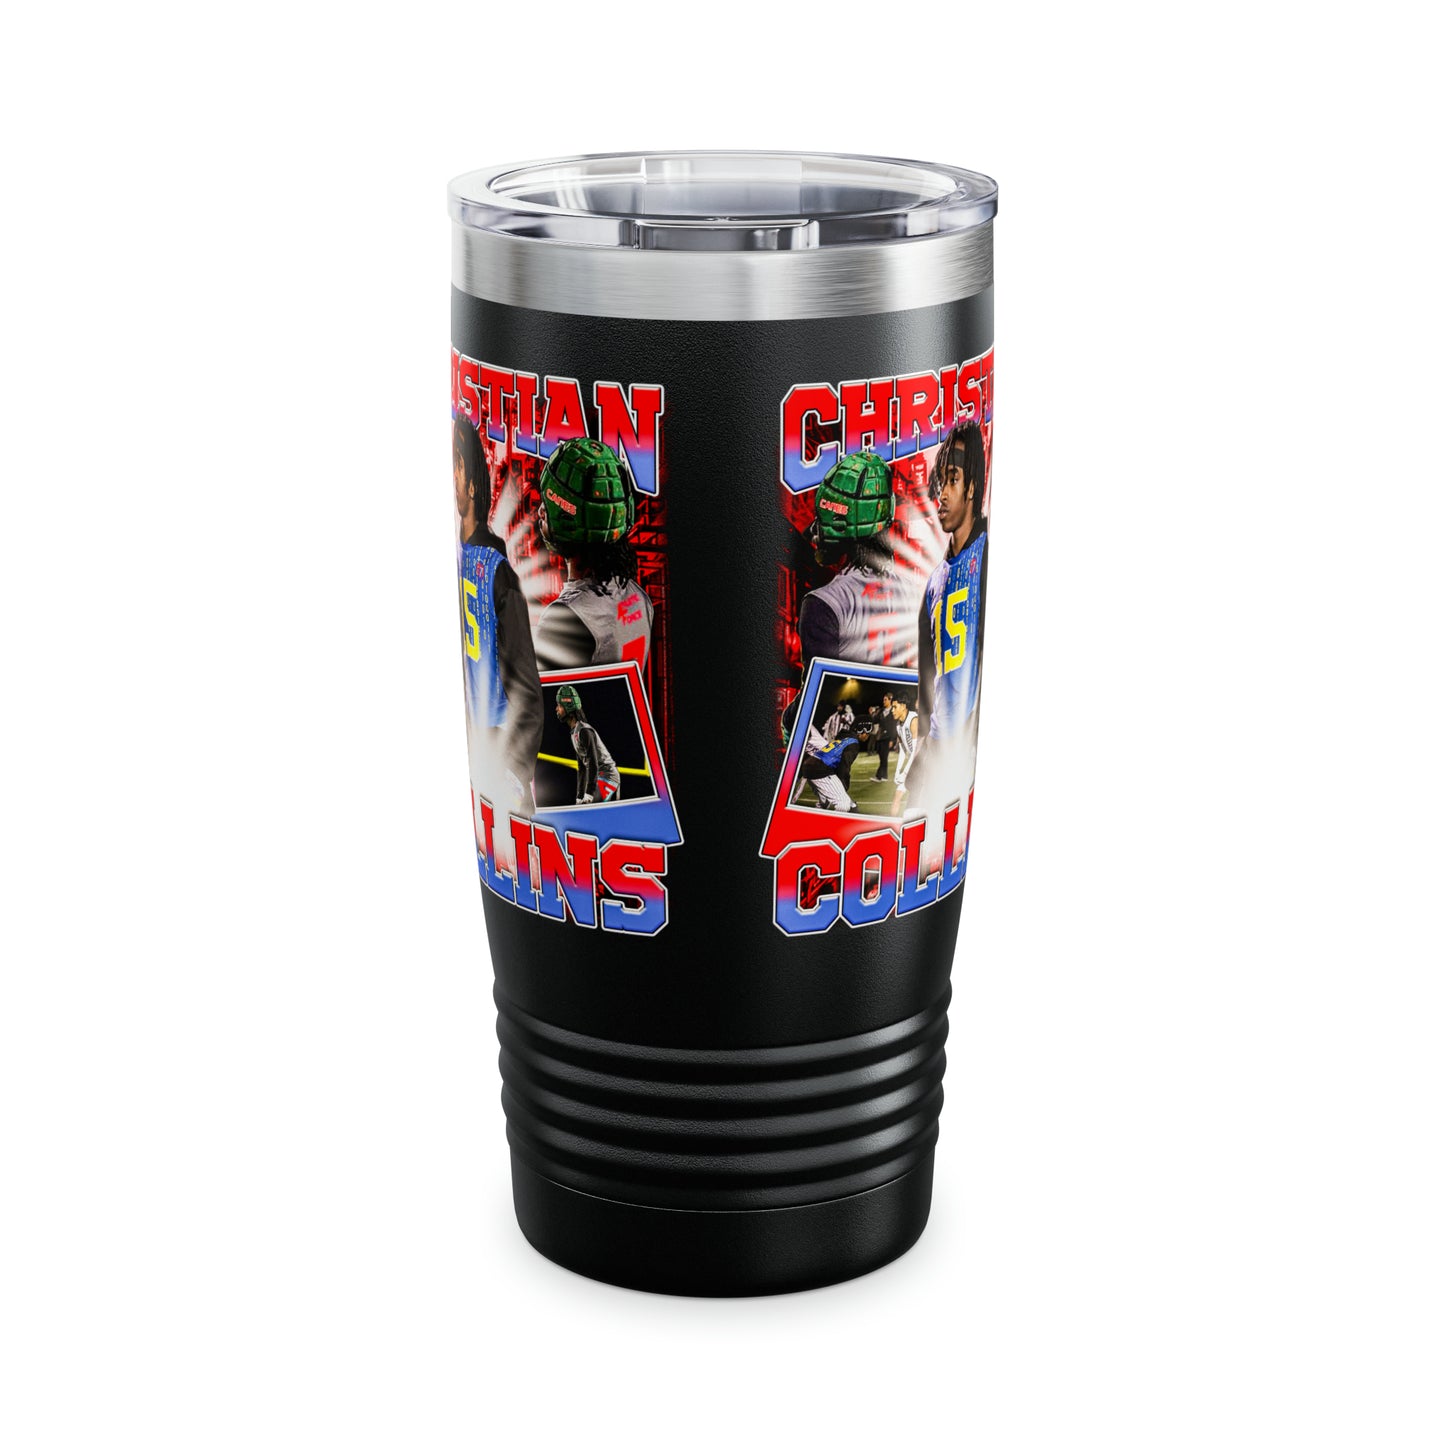 Christian Collins Stainless Steel Tumbler